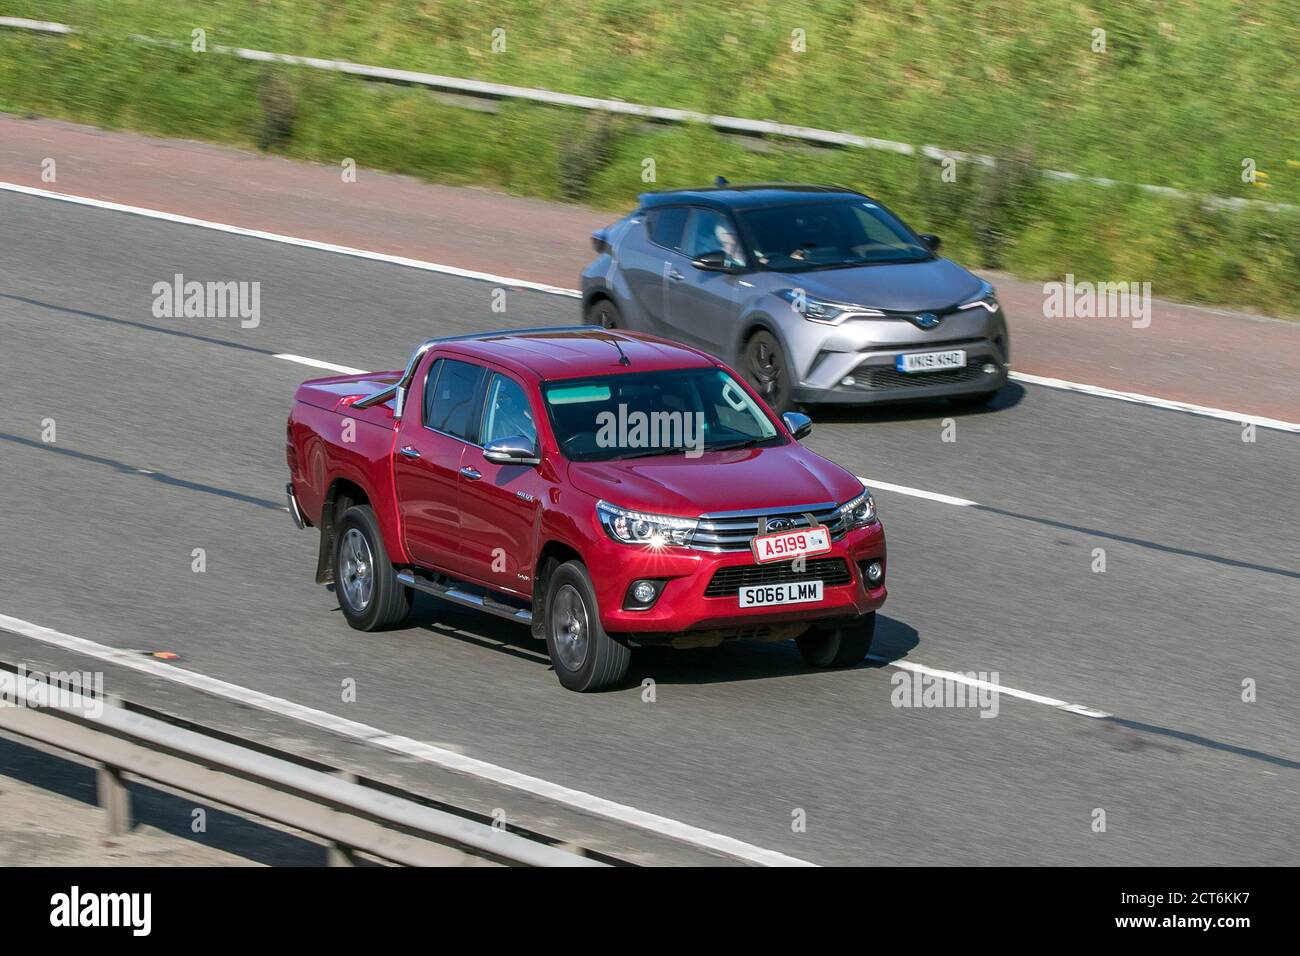 2017 red Toyota Hilux Invincible D-4d 4WD driving on the M6 motorway near Preston in Lancashire, UK. Stock Photo